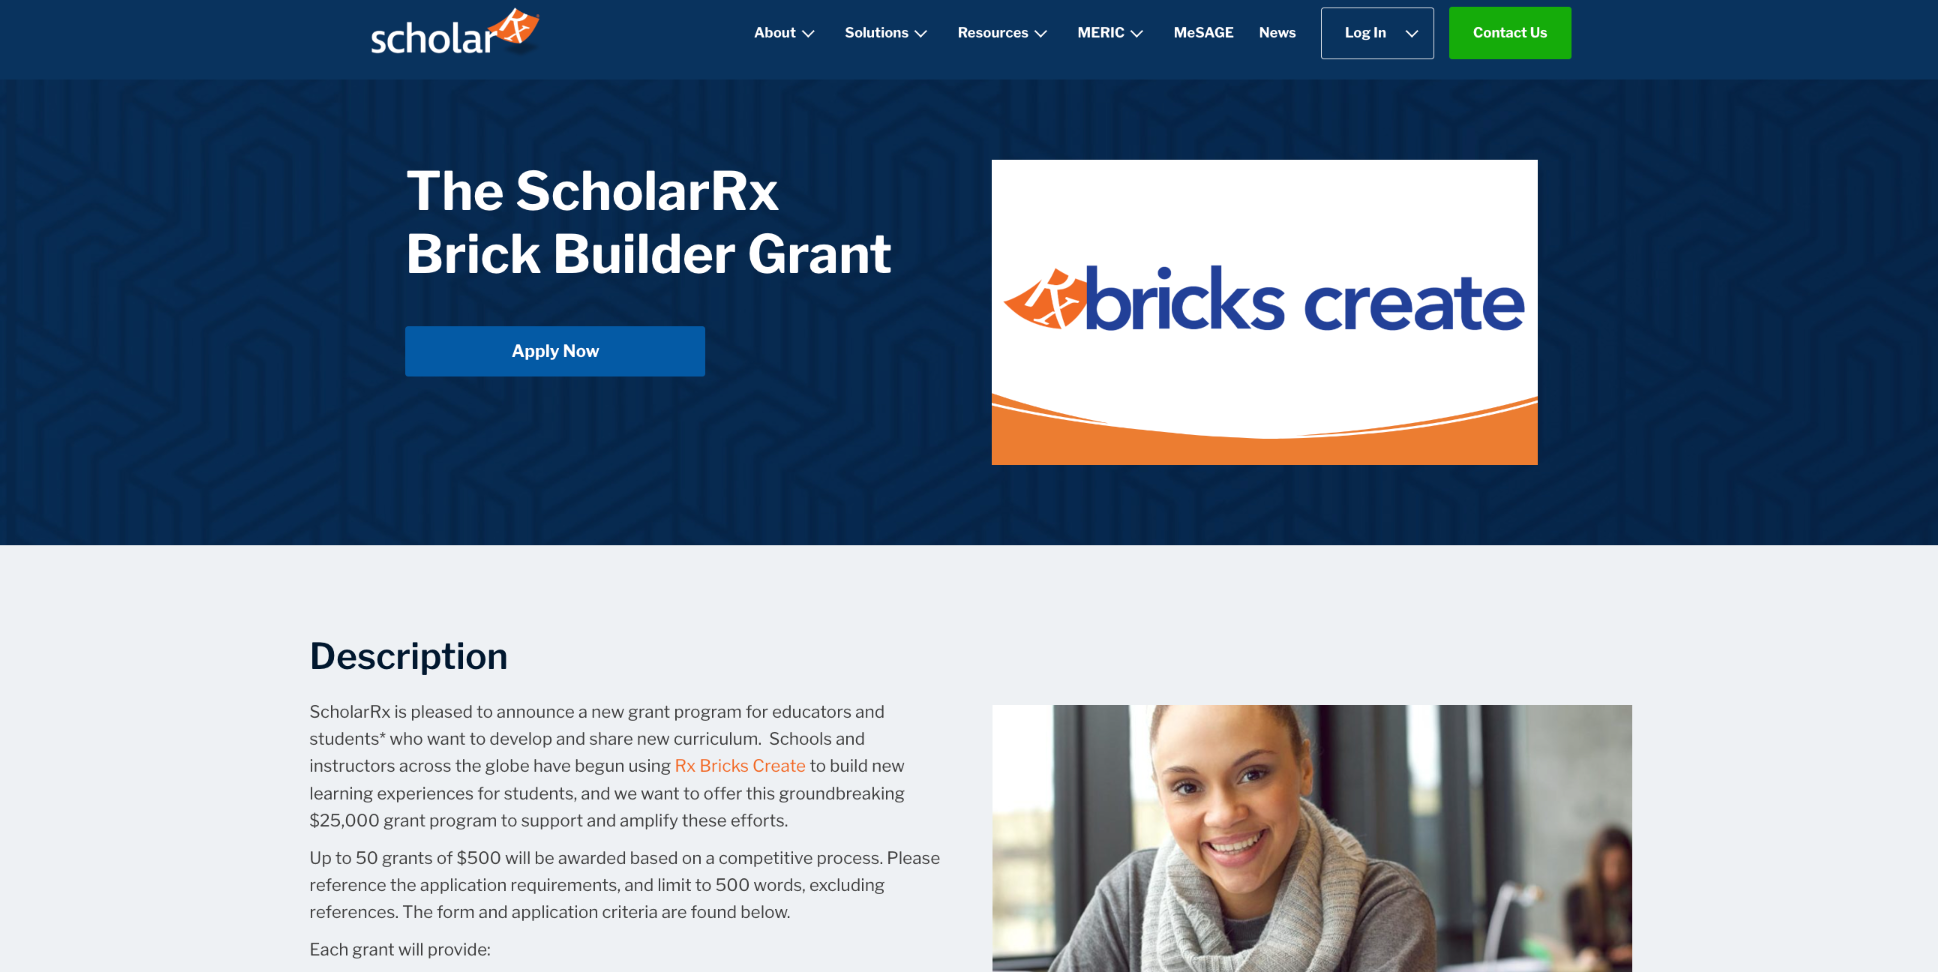 Screen capture of the landing page for the Brick Builder Grant